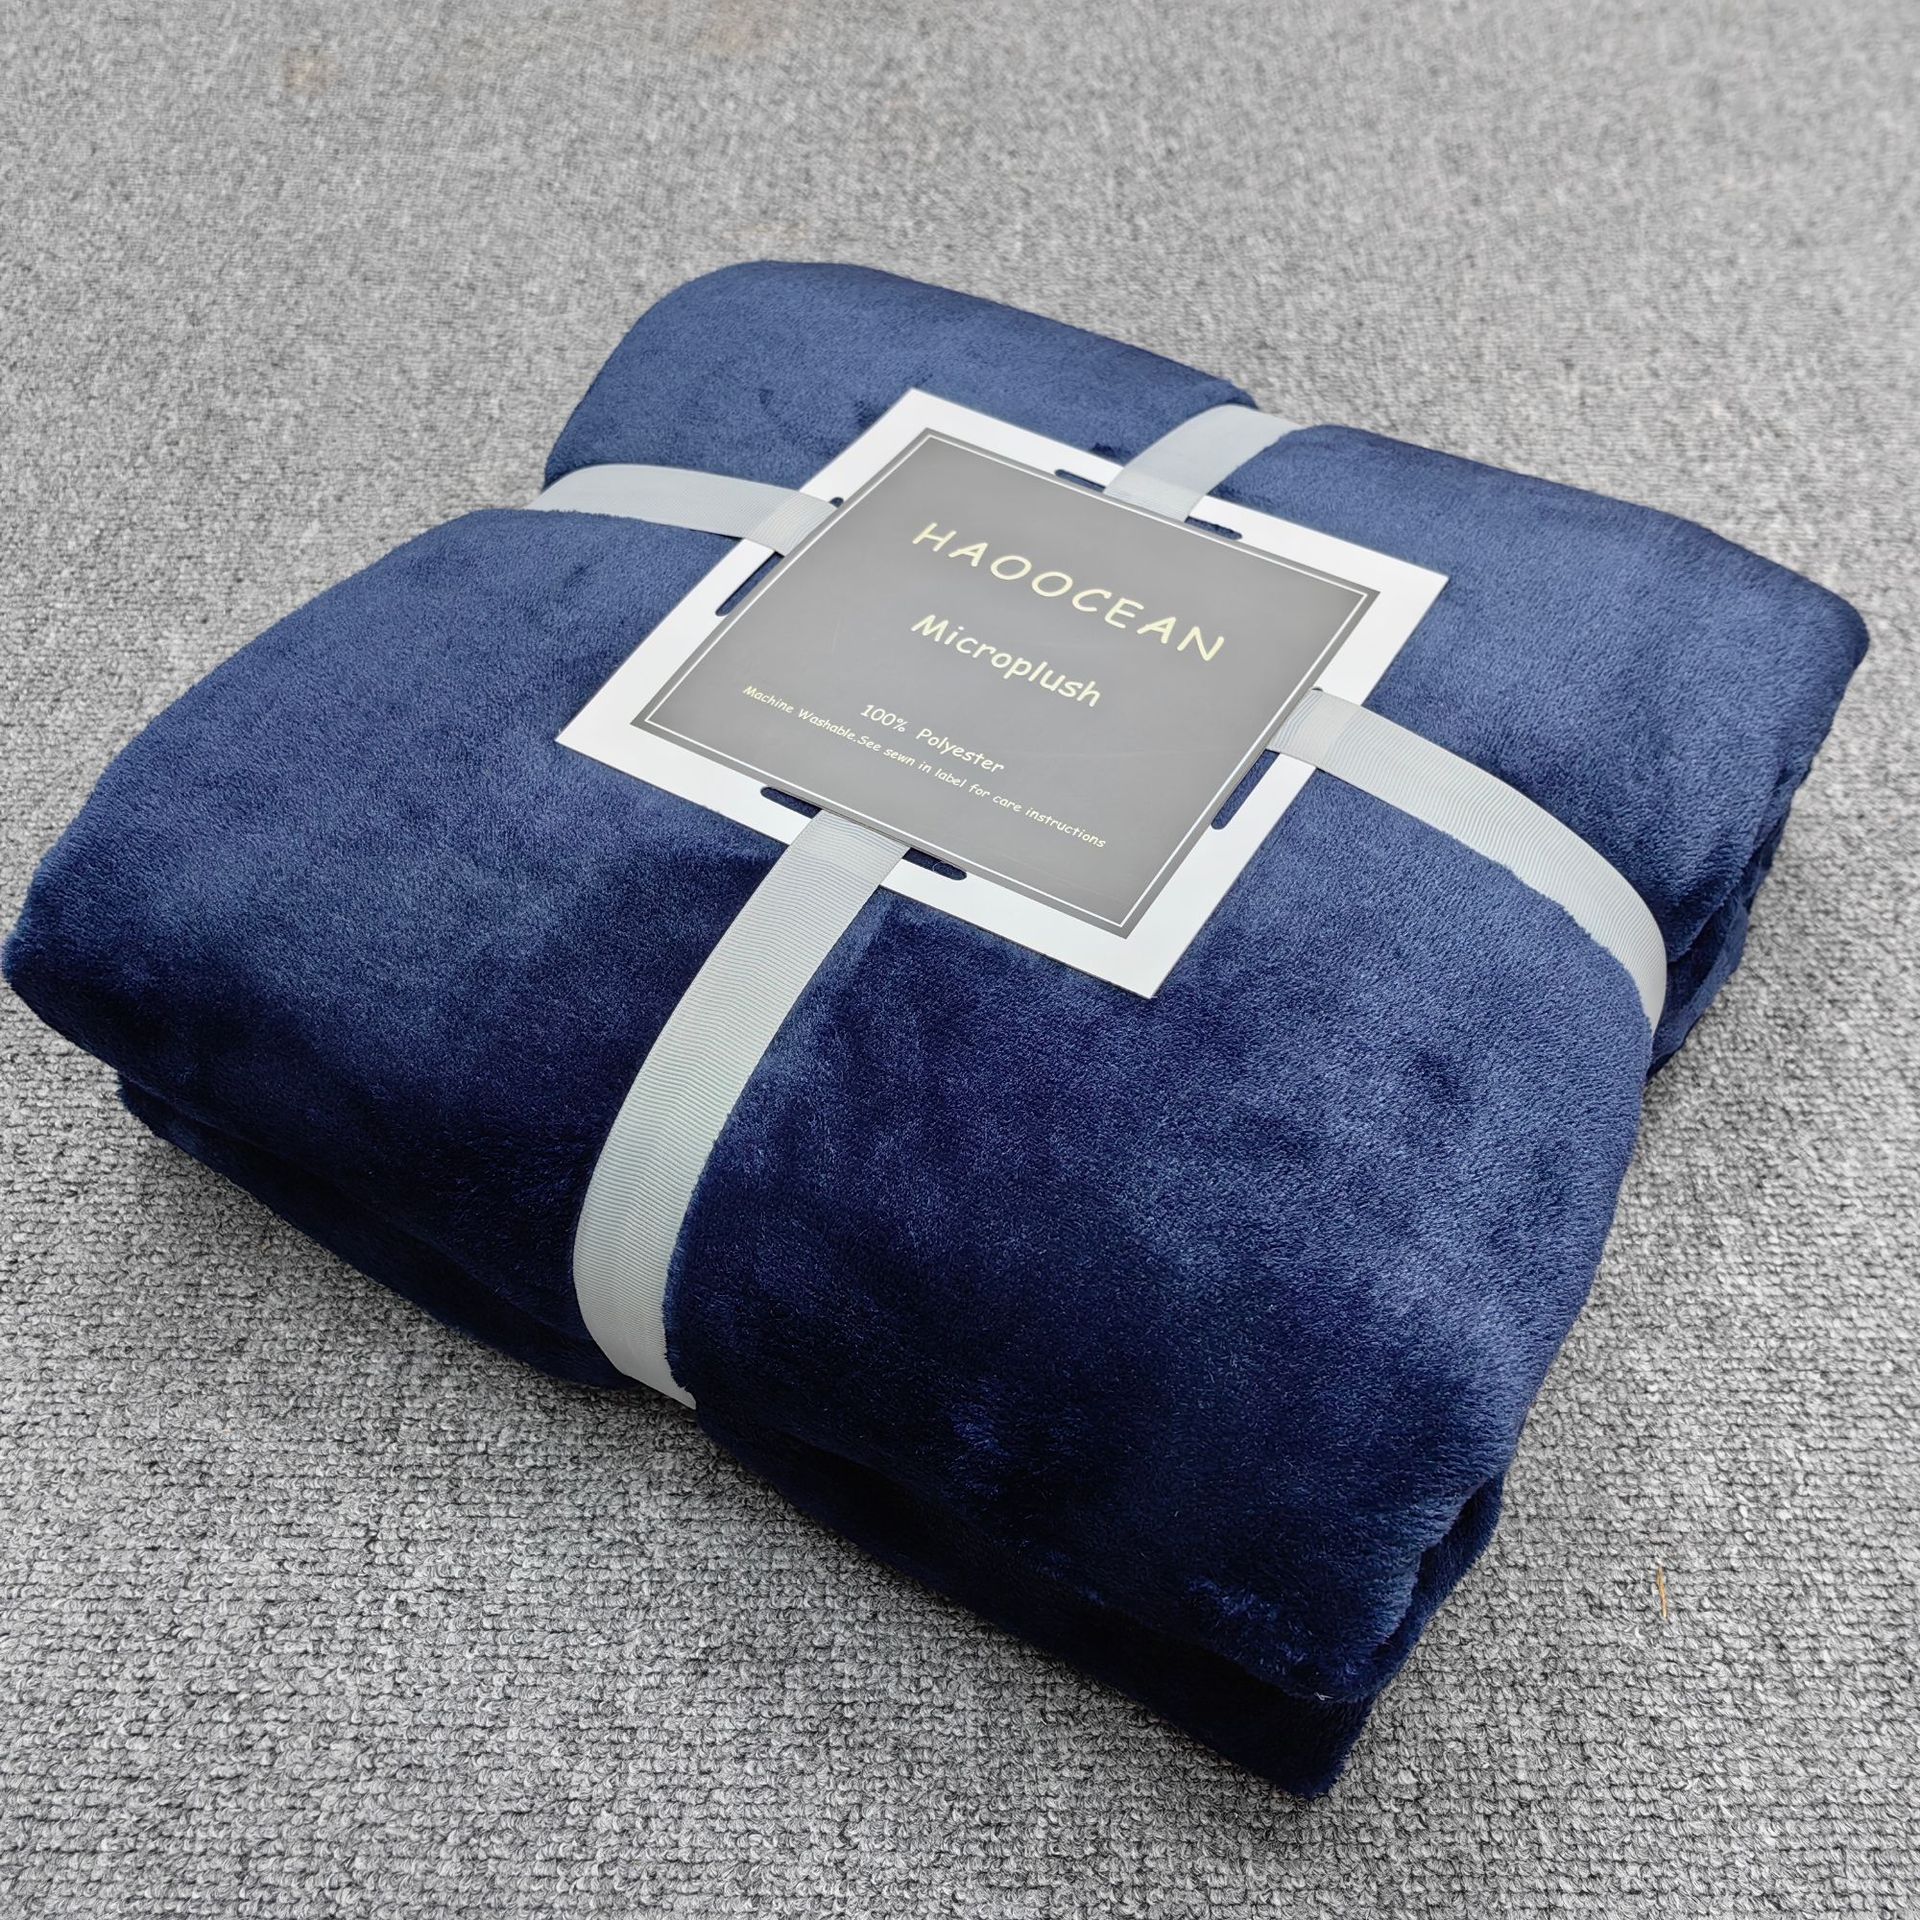 Meeting Sale Gift Gift Box Summer Thickening Coral Fleece Flannel Blanket Bed Sheets Logoblankets